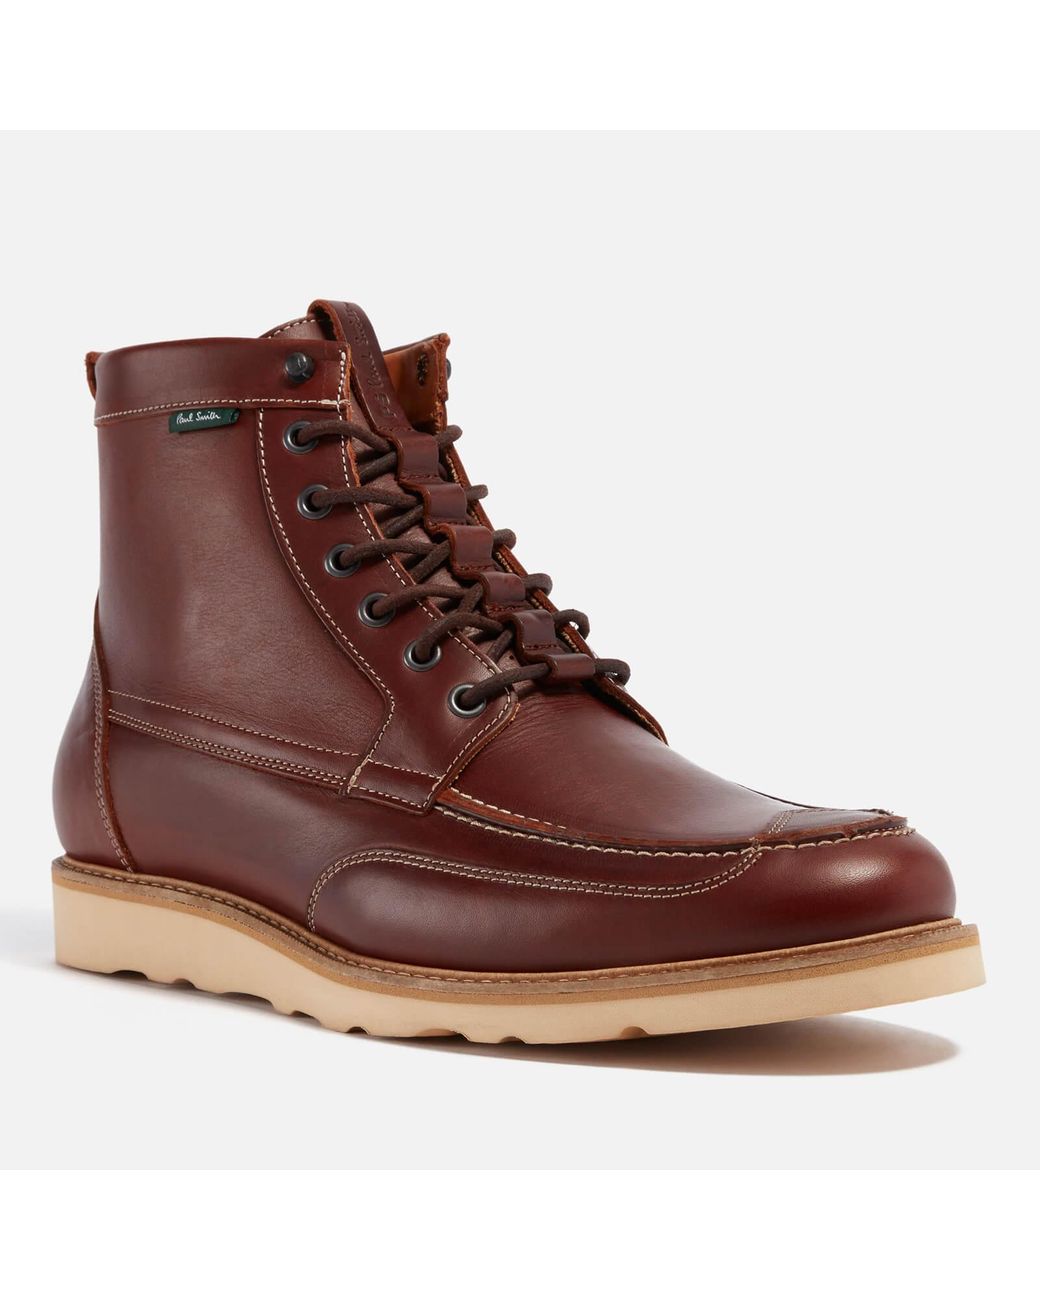 Paul Smith Tufnel Leather Boots in Brown for Men | Lyst Australia